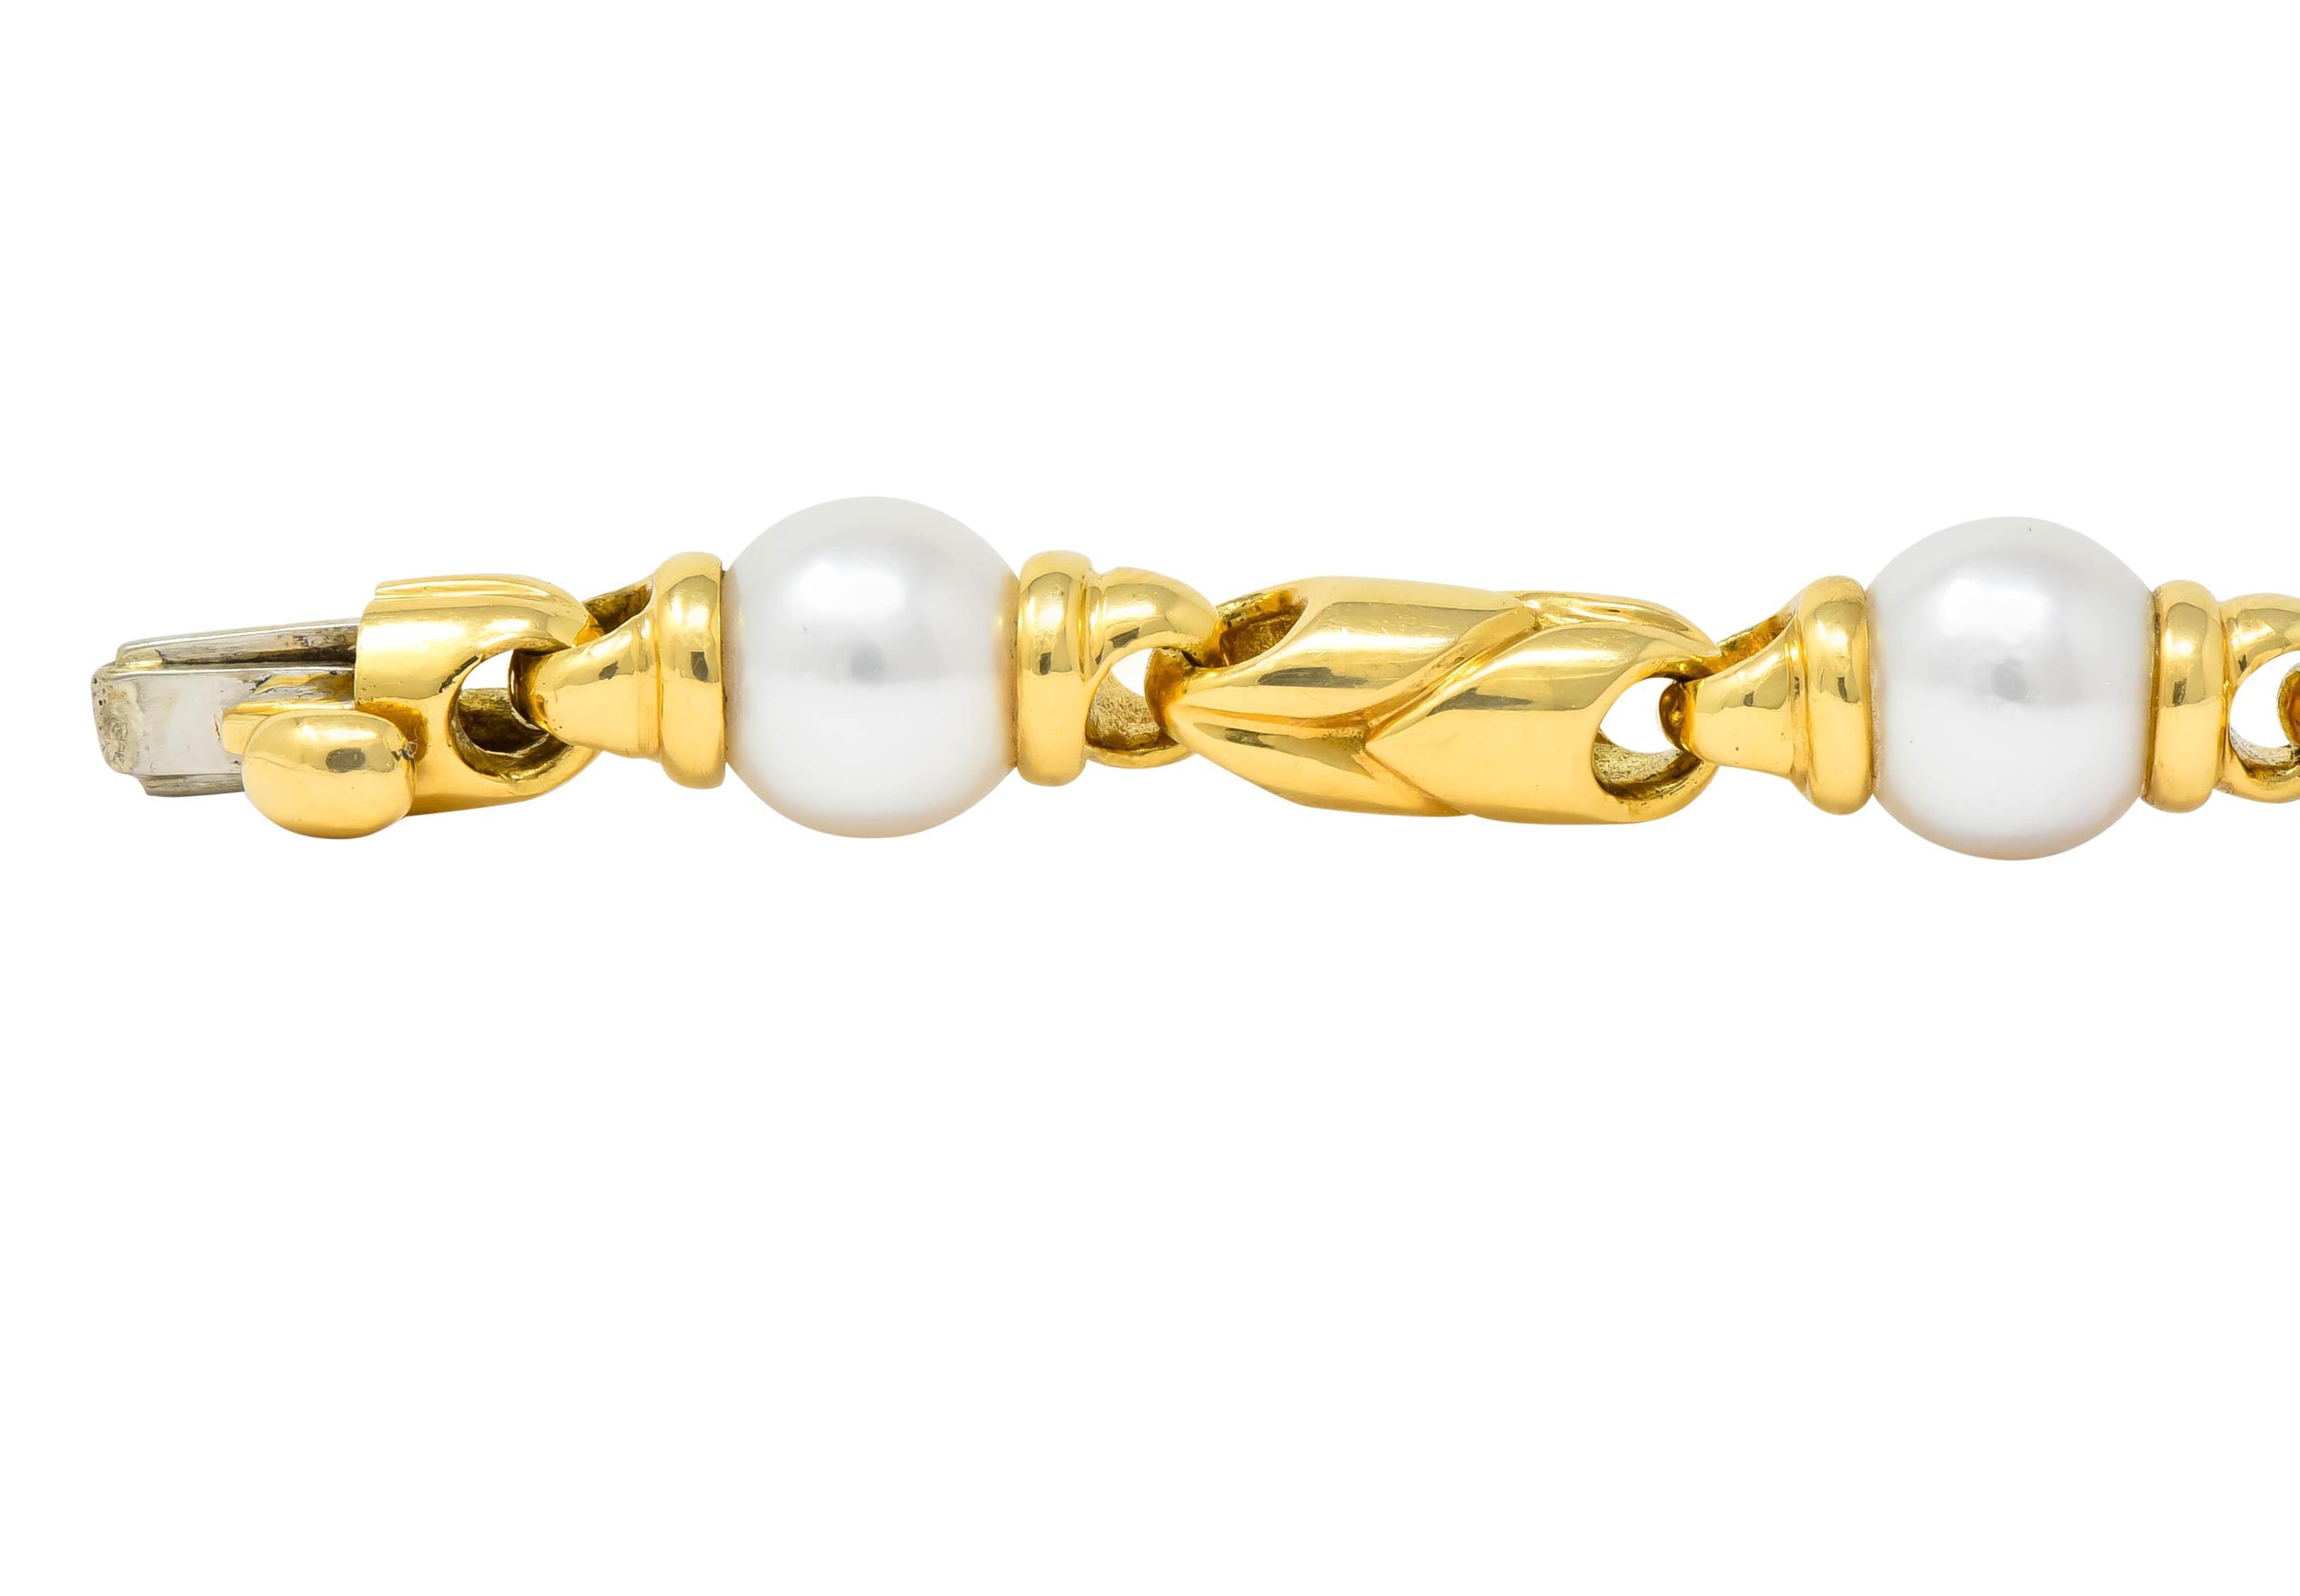 Link style bracelet comprised of cultured pearls and deeply grooved  polished gold links

Cultured pearls measure approximately 8.7 mm, cream body color with strong rosé overtones and excellent luster  

Completed by concealed safety clasp with